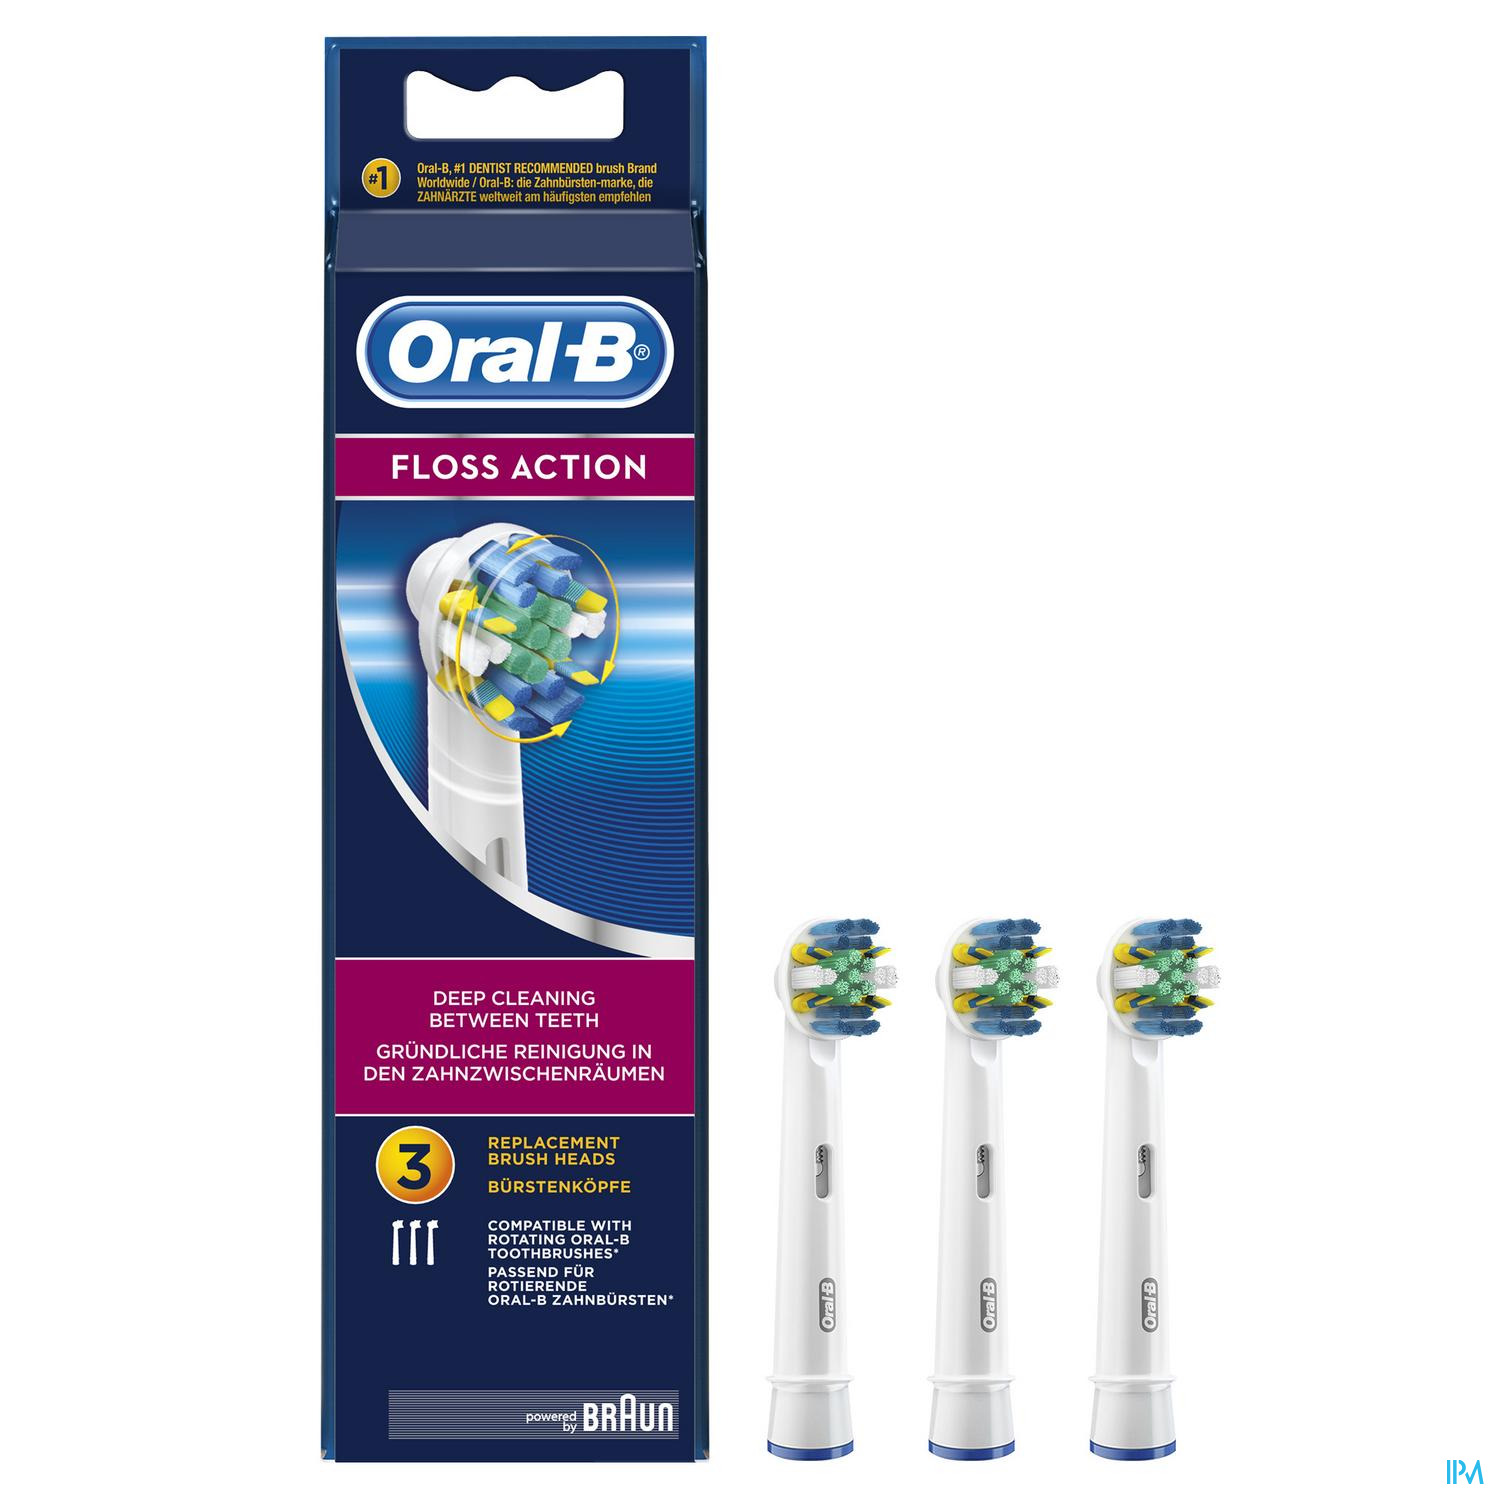 Oral-b Refill Eb25-3 Floss Action 3-pack